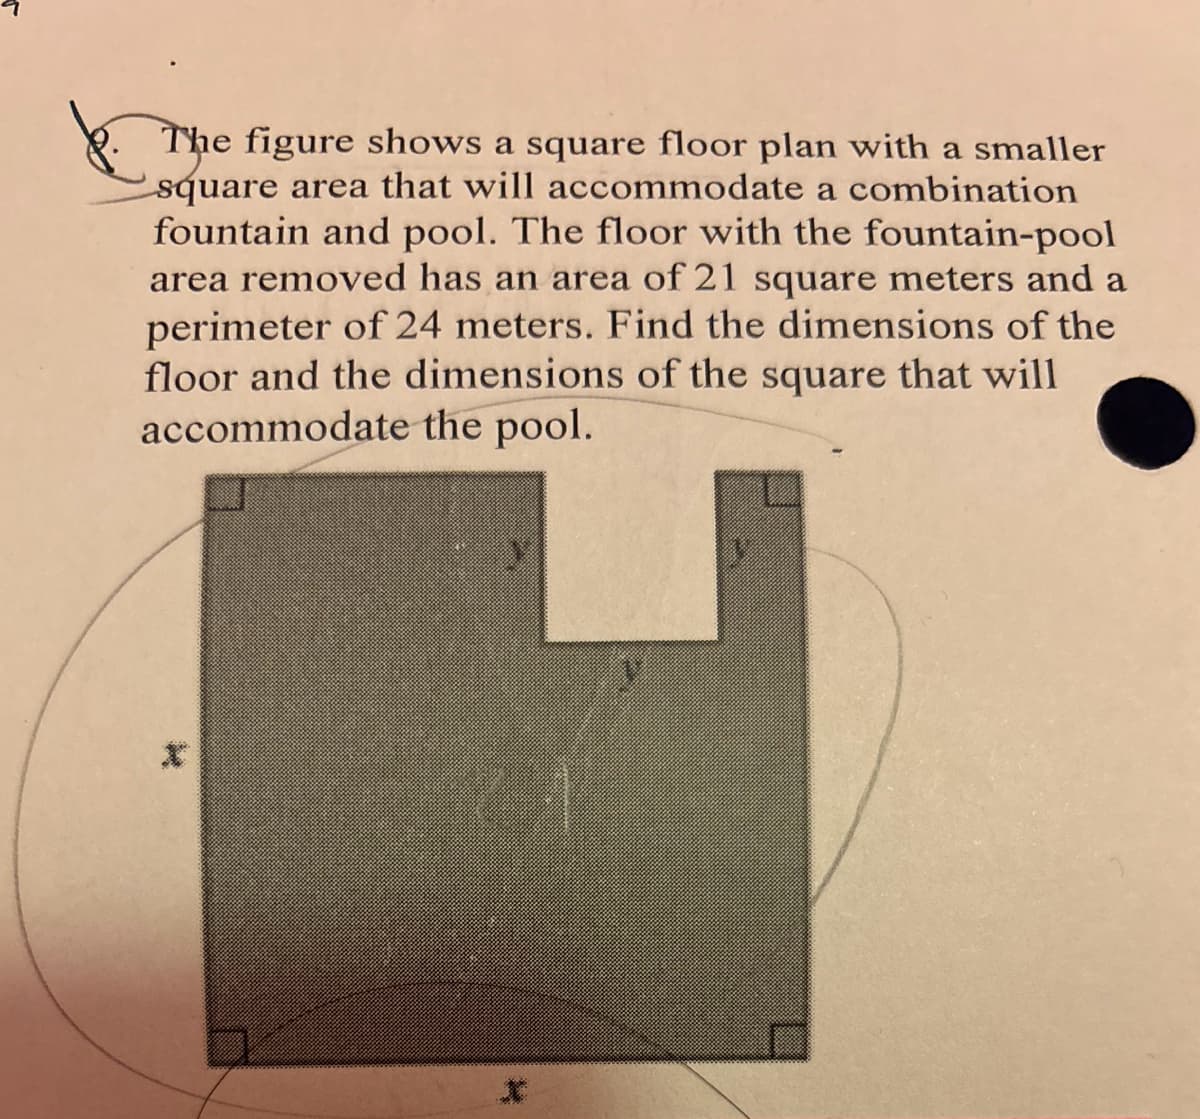 The figure shows a square floor plan with a smaller
square area that will accommodate a combination
fountain and pool. The floor with the fountain-pool
area removed has an area of 21 square meters and a
perimeter of 24 meters. Find the dimensions of the
floor and the dimensions of the square that will
accommodate the pool.